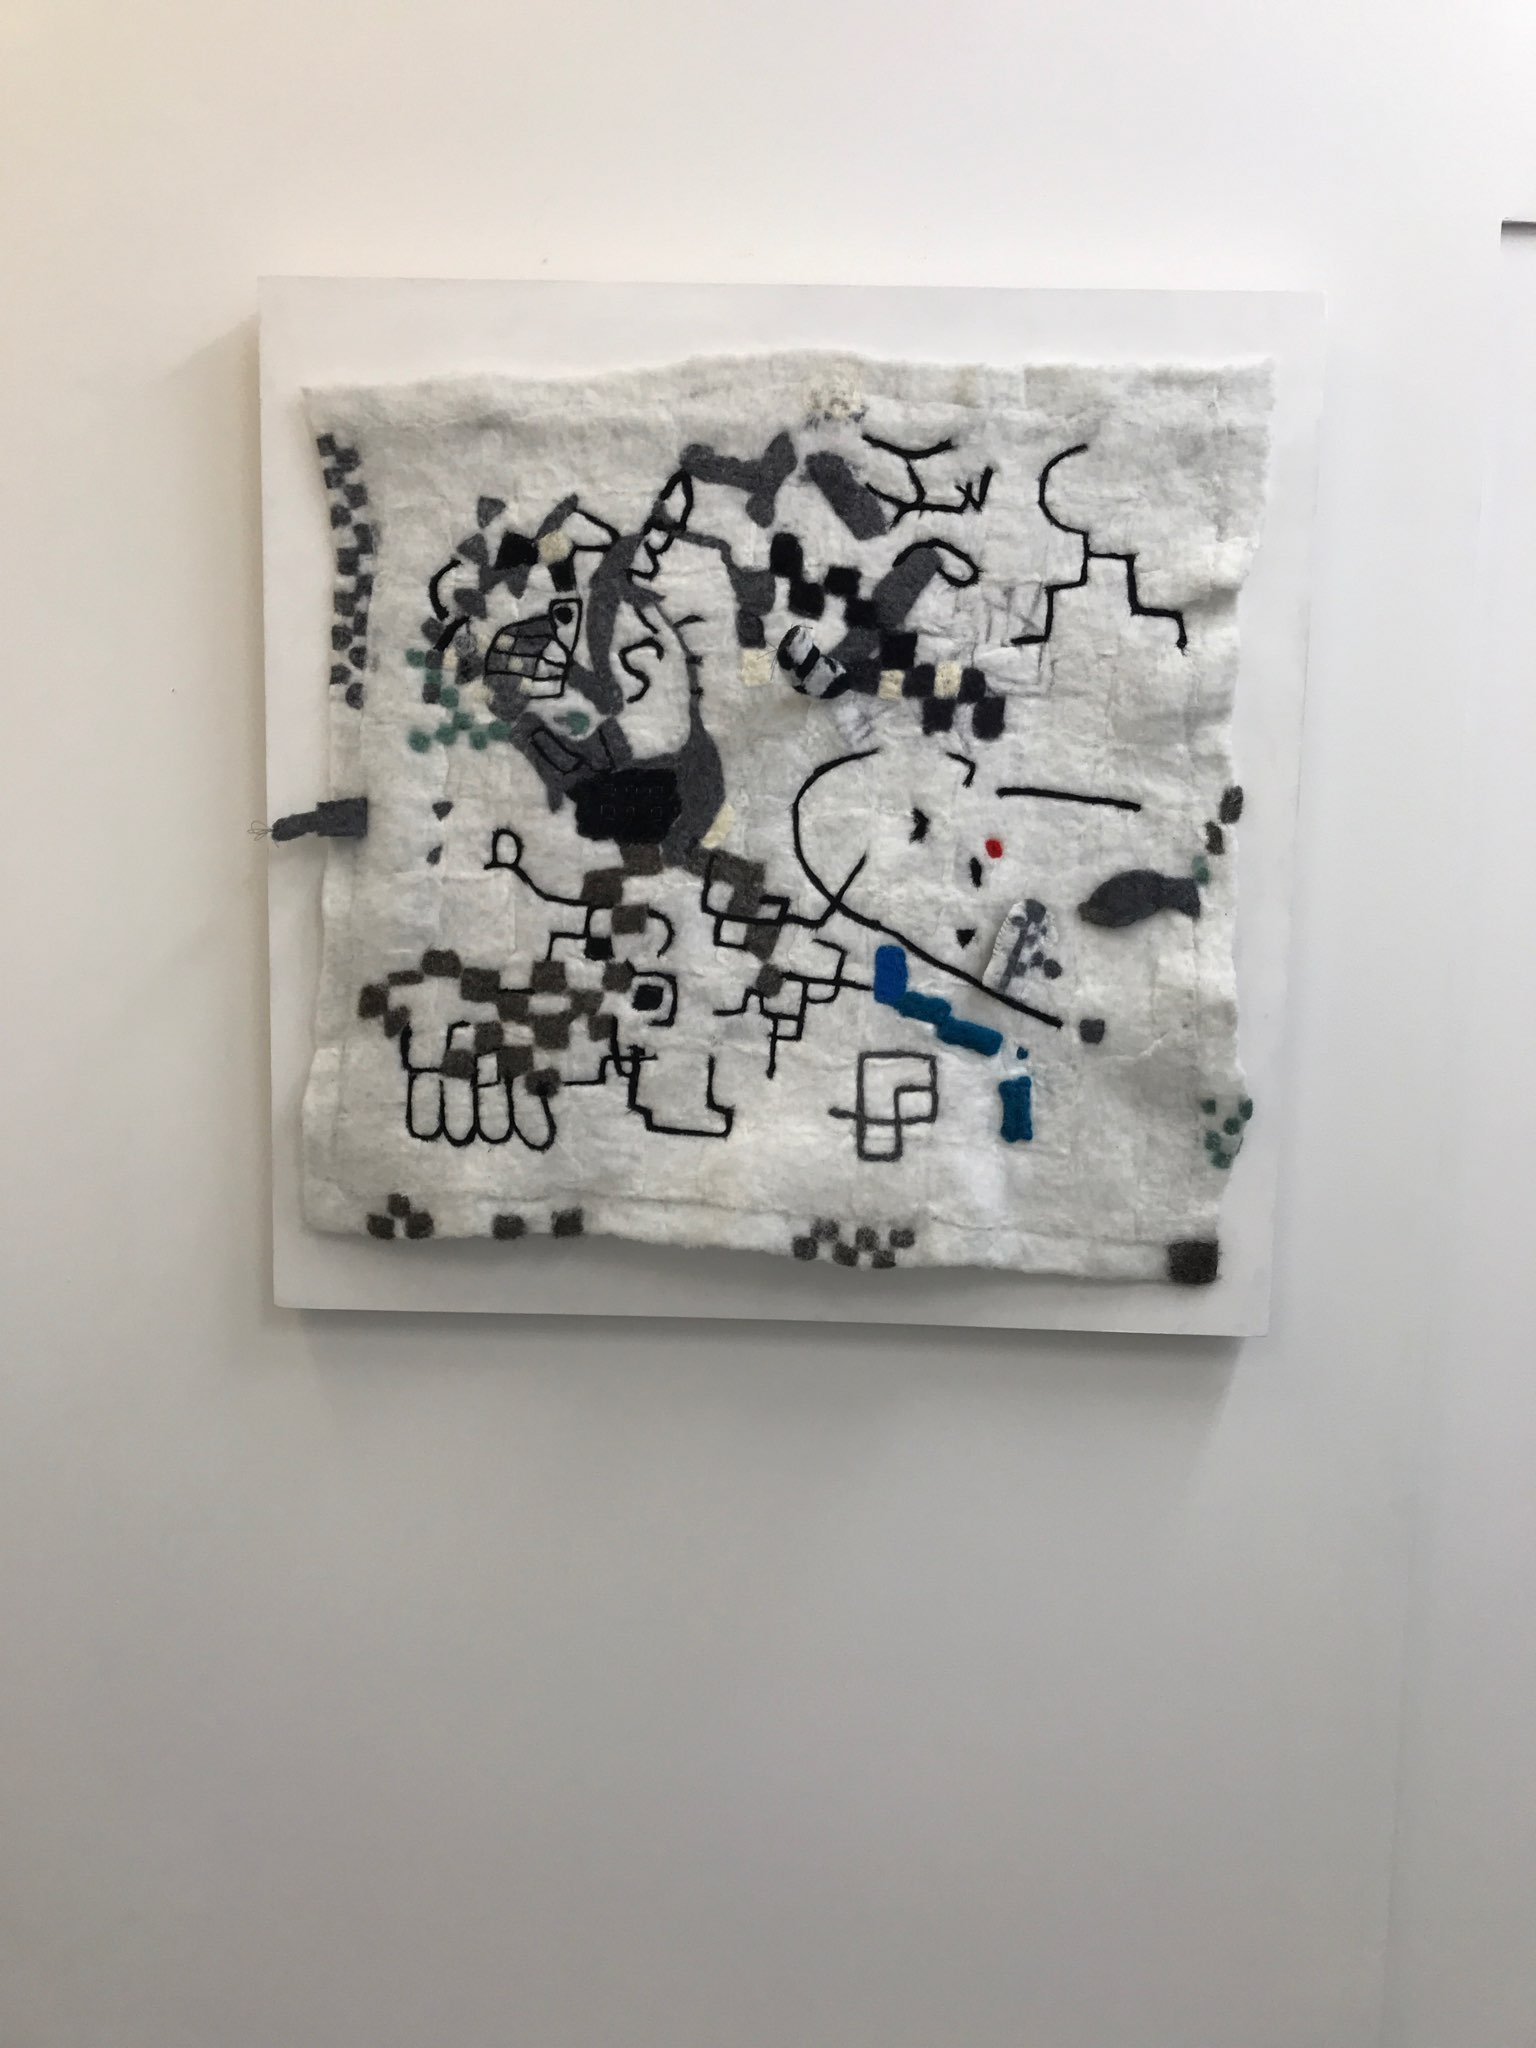 Tina Douglas fuzzy logic 2018, hand felted wool, stainless steel fibre, micro controllers, speakers, sound, painted ply, 91 x 91 cm, installation view